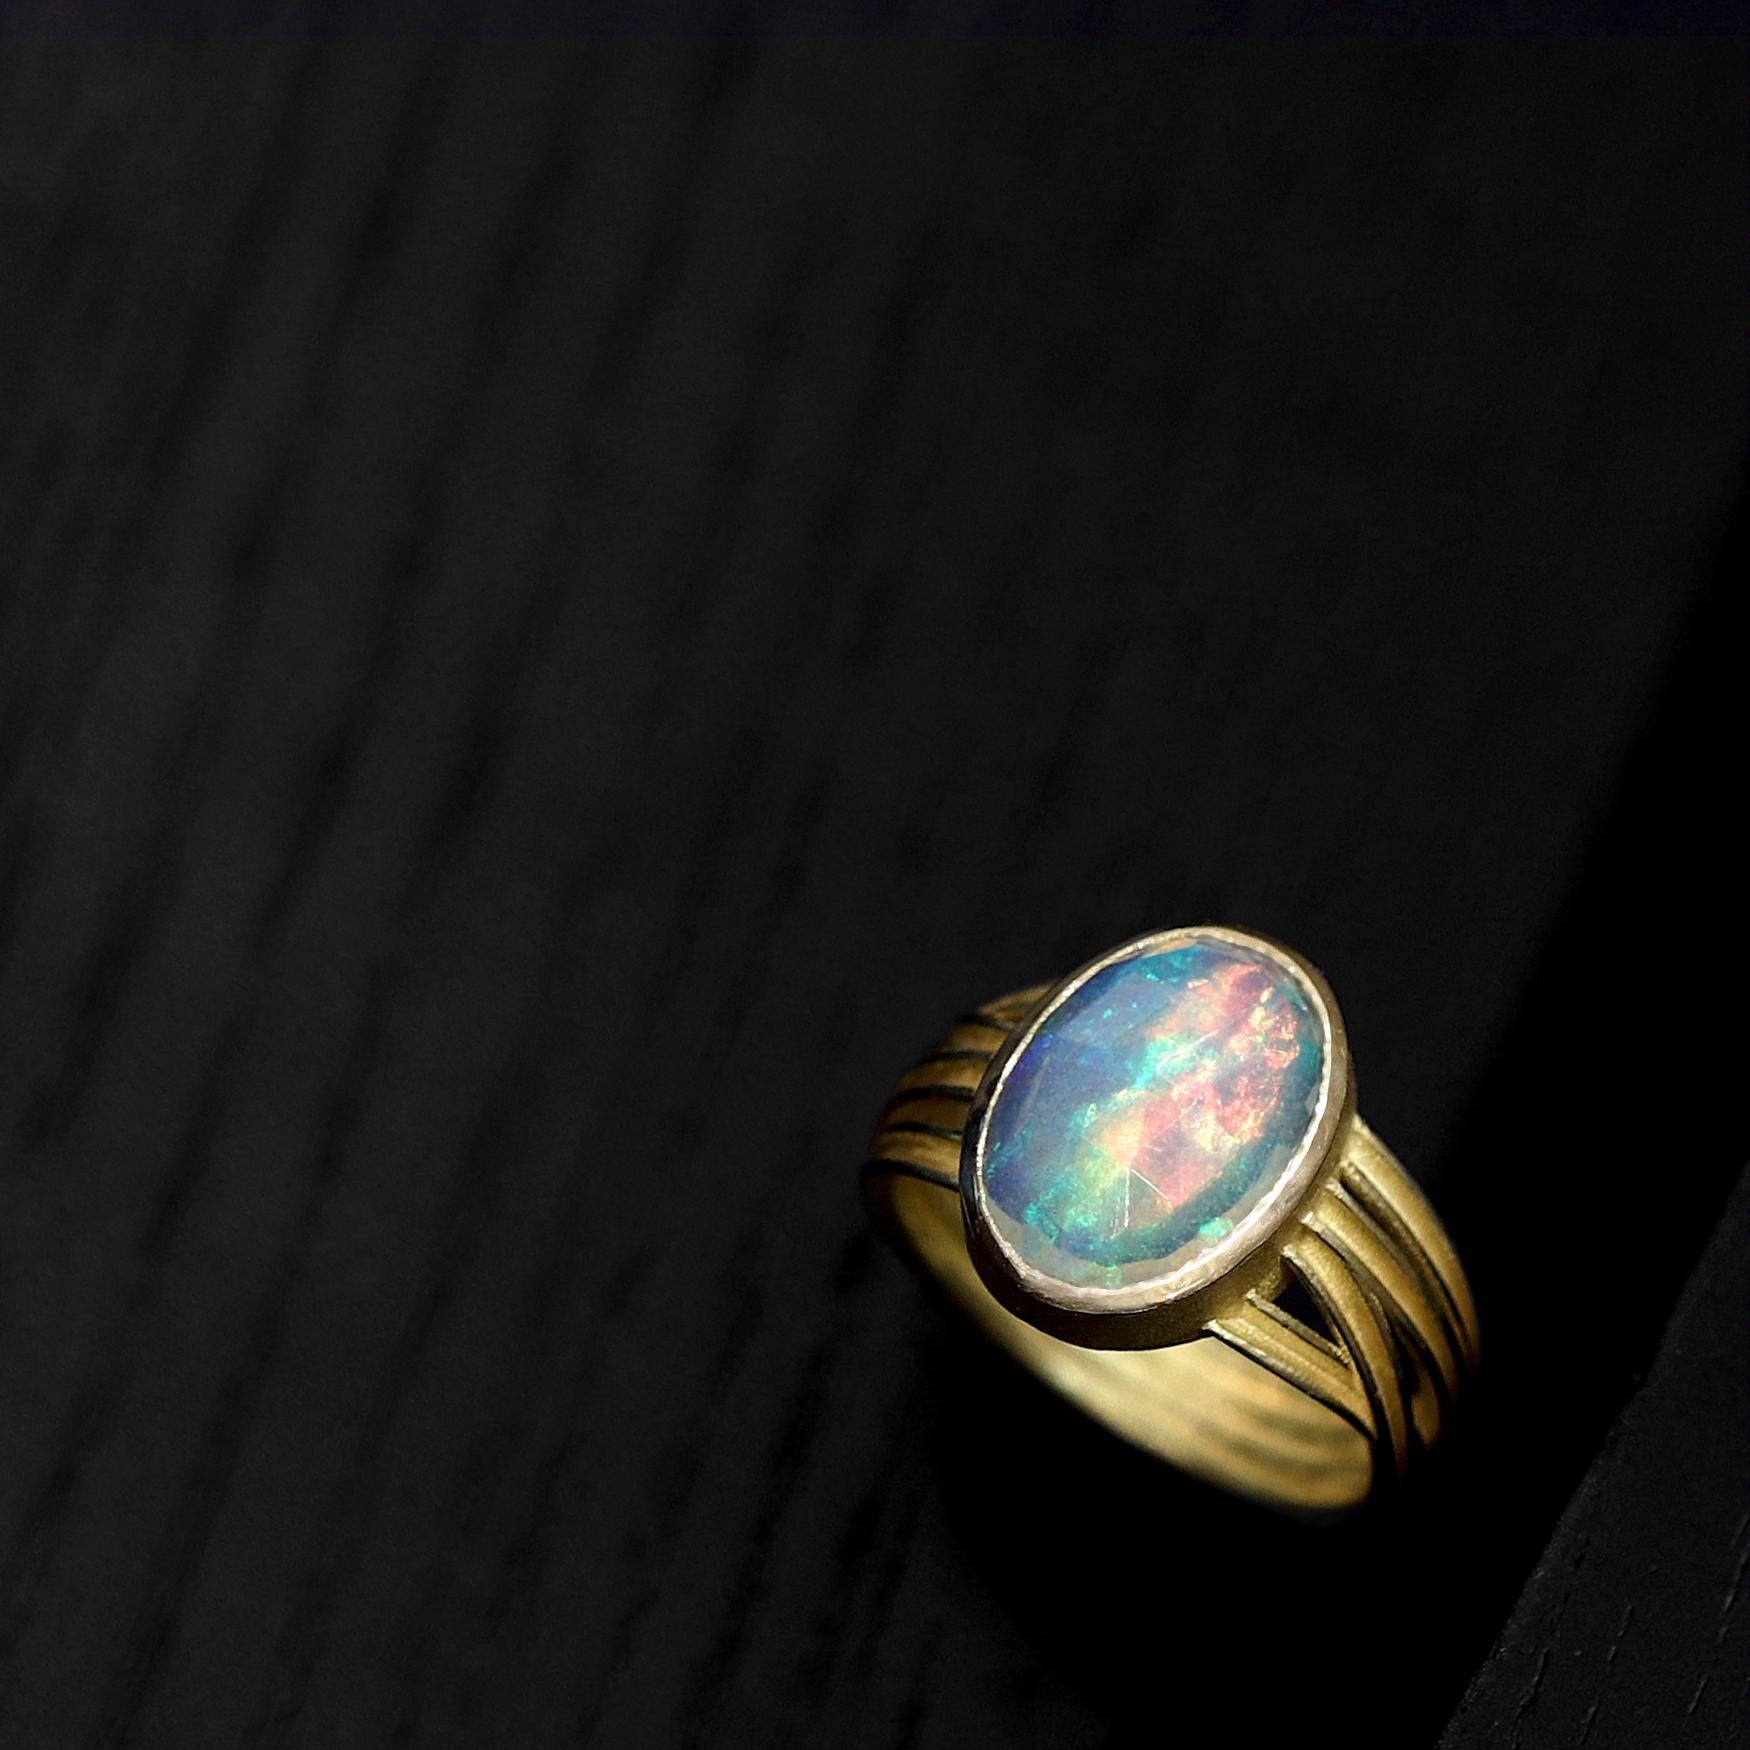 One of a Kind Multiwrap Band Ring hand-fabricated by master jewelry maker Barbara Heinrich showcasing an 2.89 carat rose-cut oval Ethiopian opal with brilliant rainbow color play and flash. The gorgeous gemstone rests in an 18k yellow gold bezel